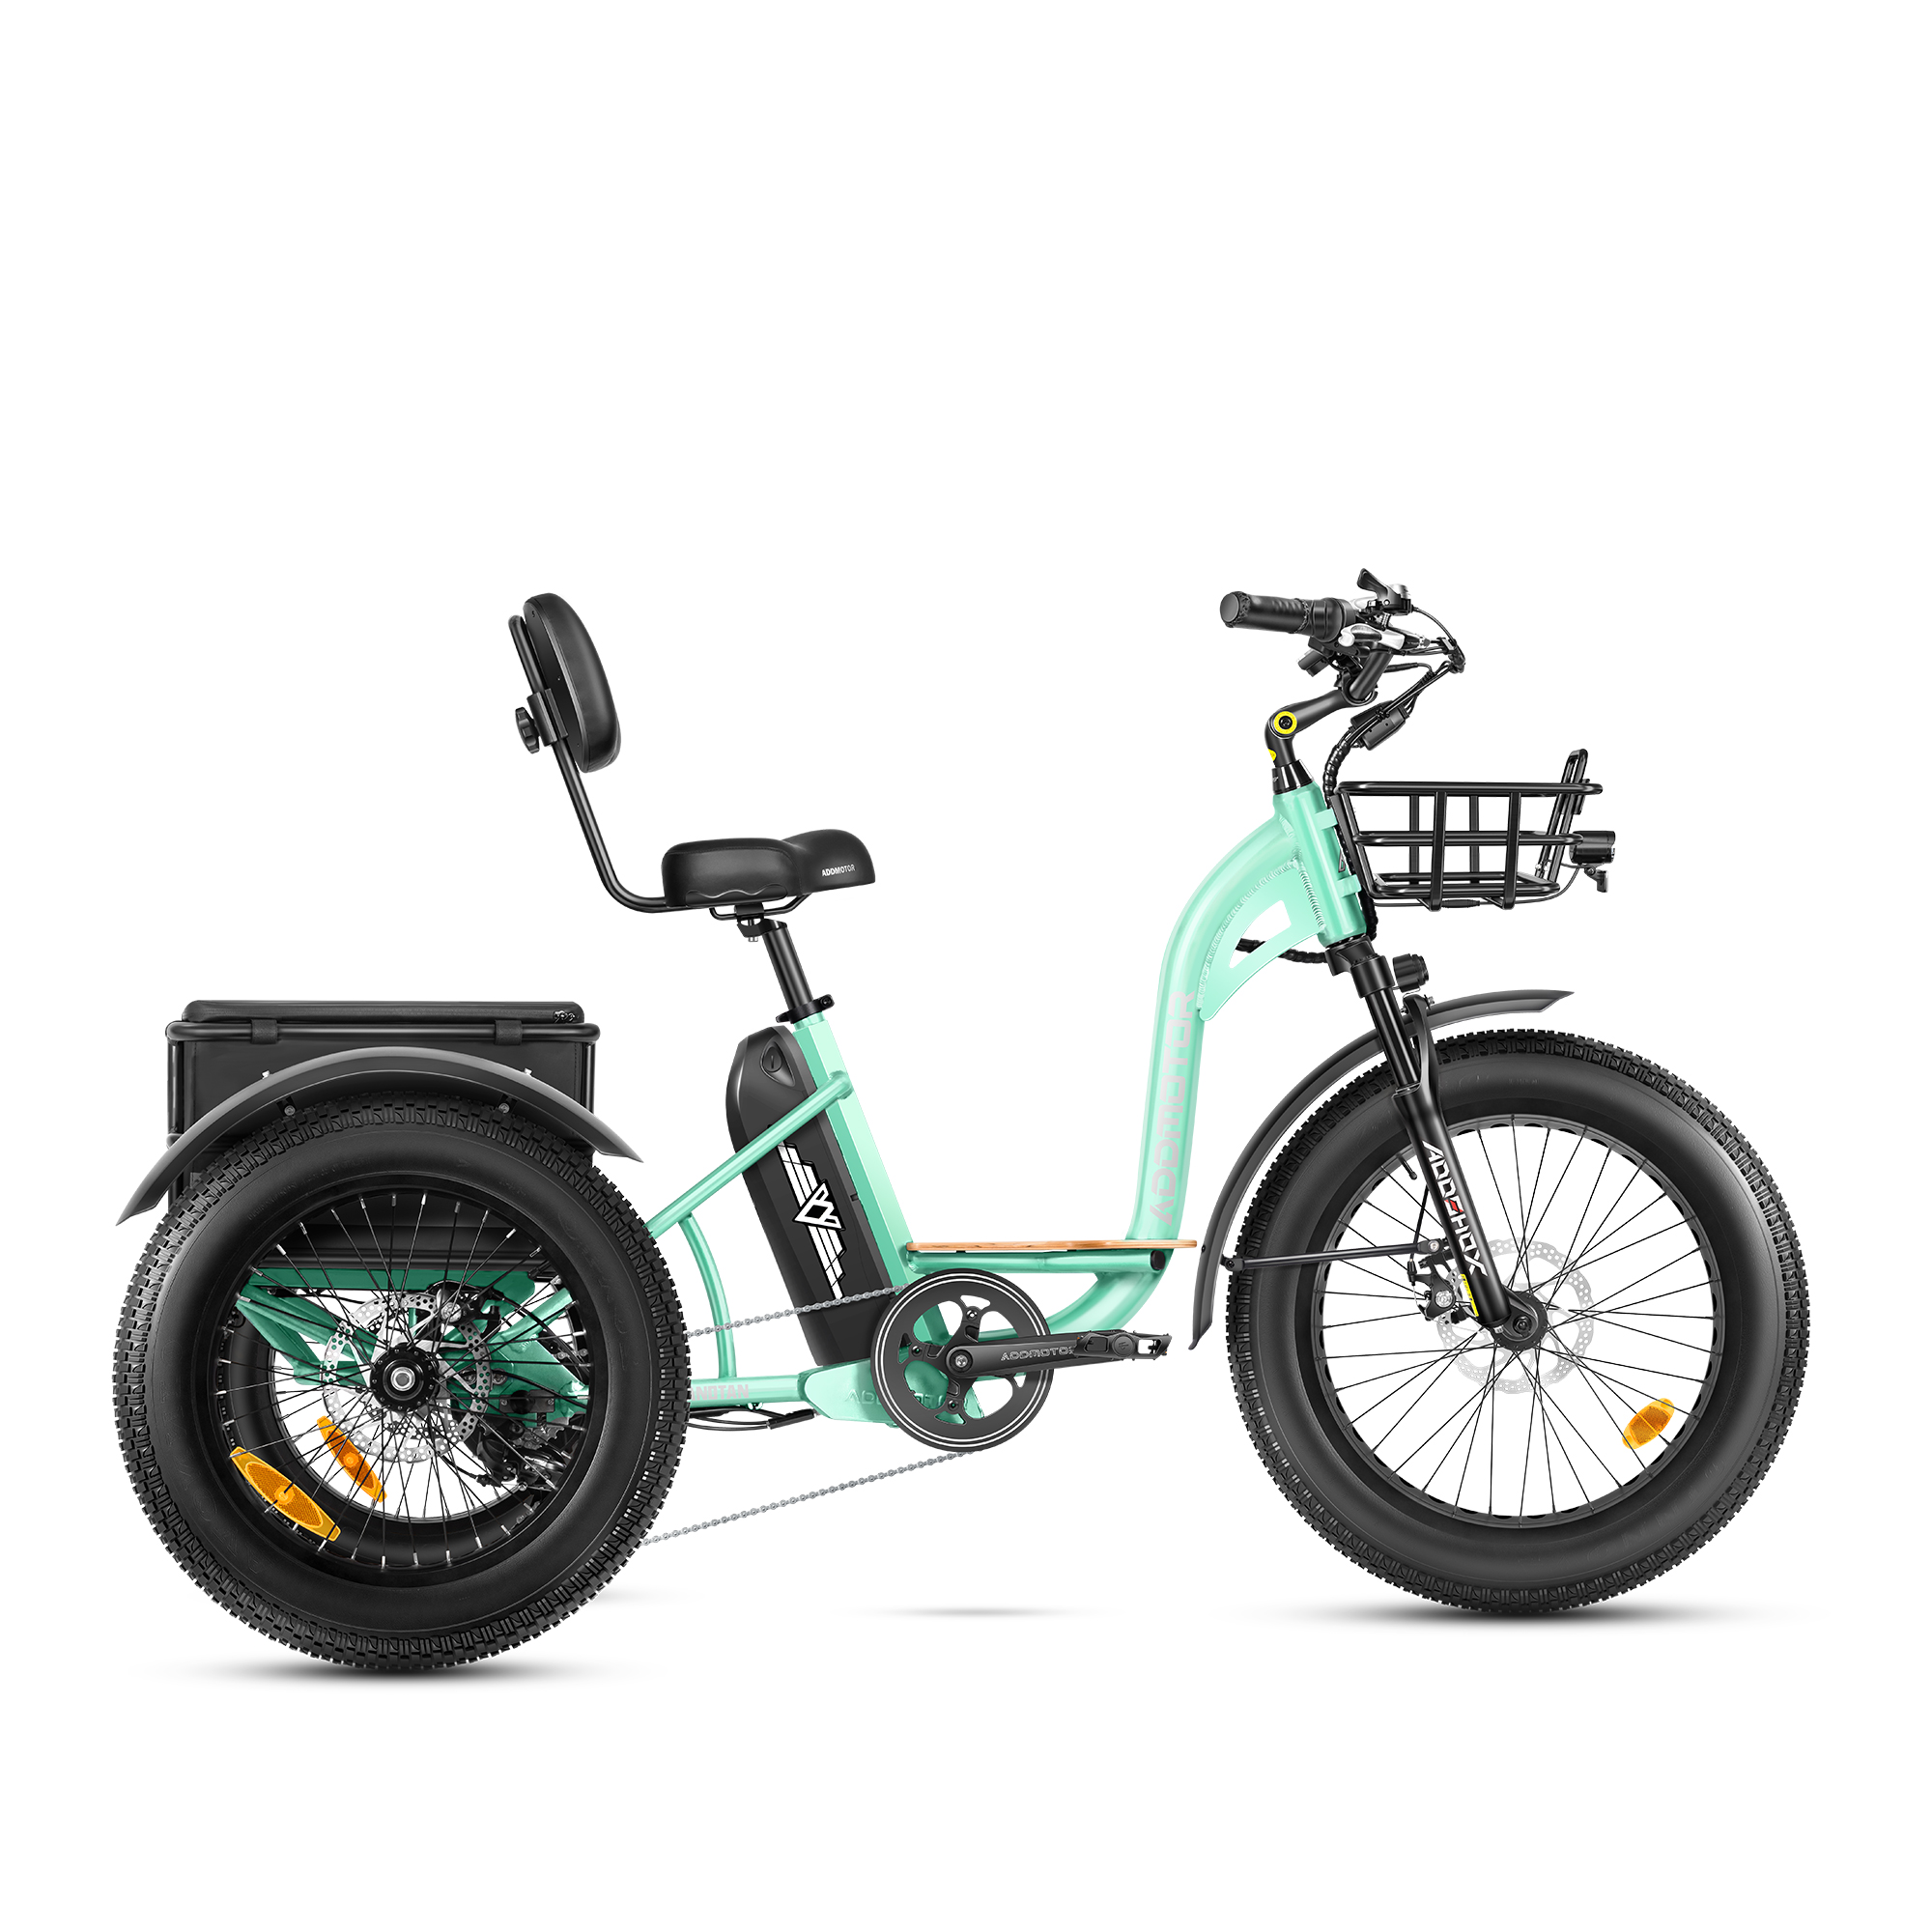 Addmotor Grandtan M-340 Electric Tricycle | Best Electric Trike for Adults and Seniors | 750W Rear Motor | UL Standard for Safety | Cyan